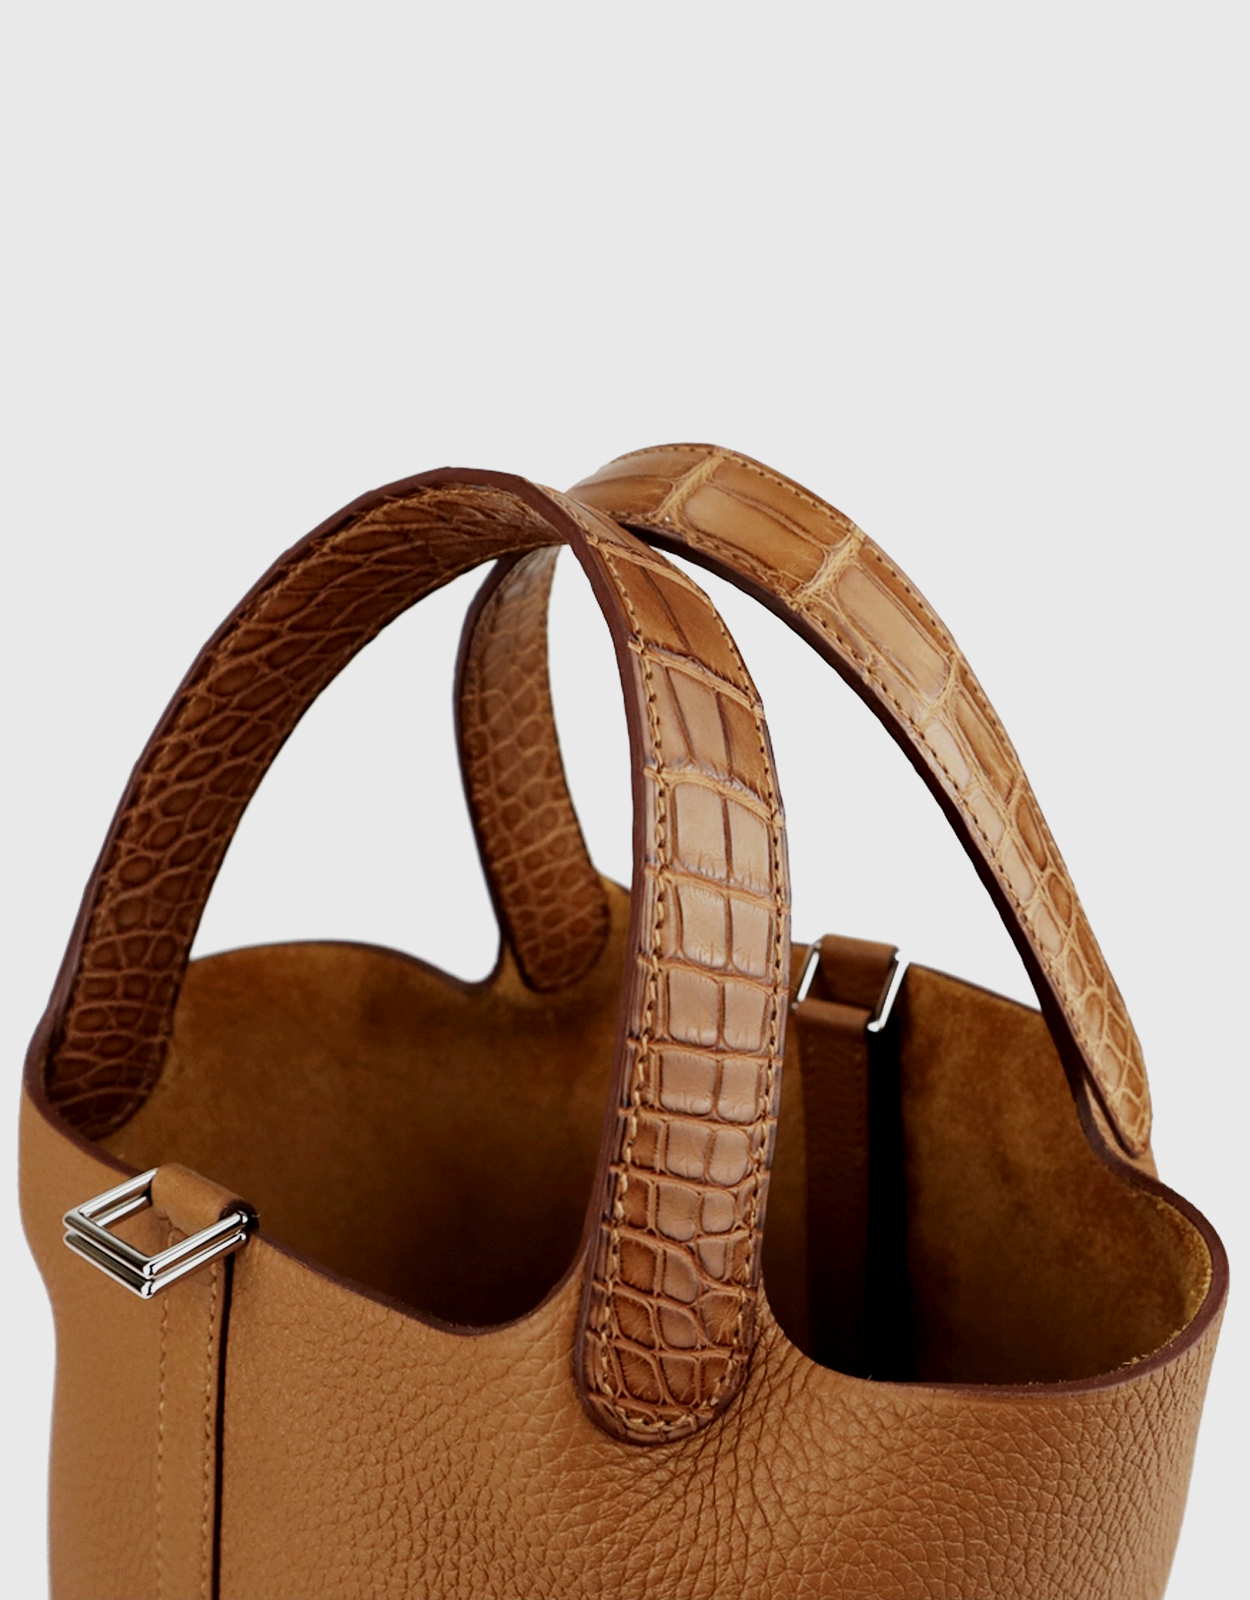 Hands free! With this strap, you can carry the Hermes Picotin bag as